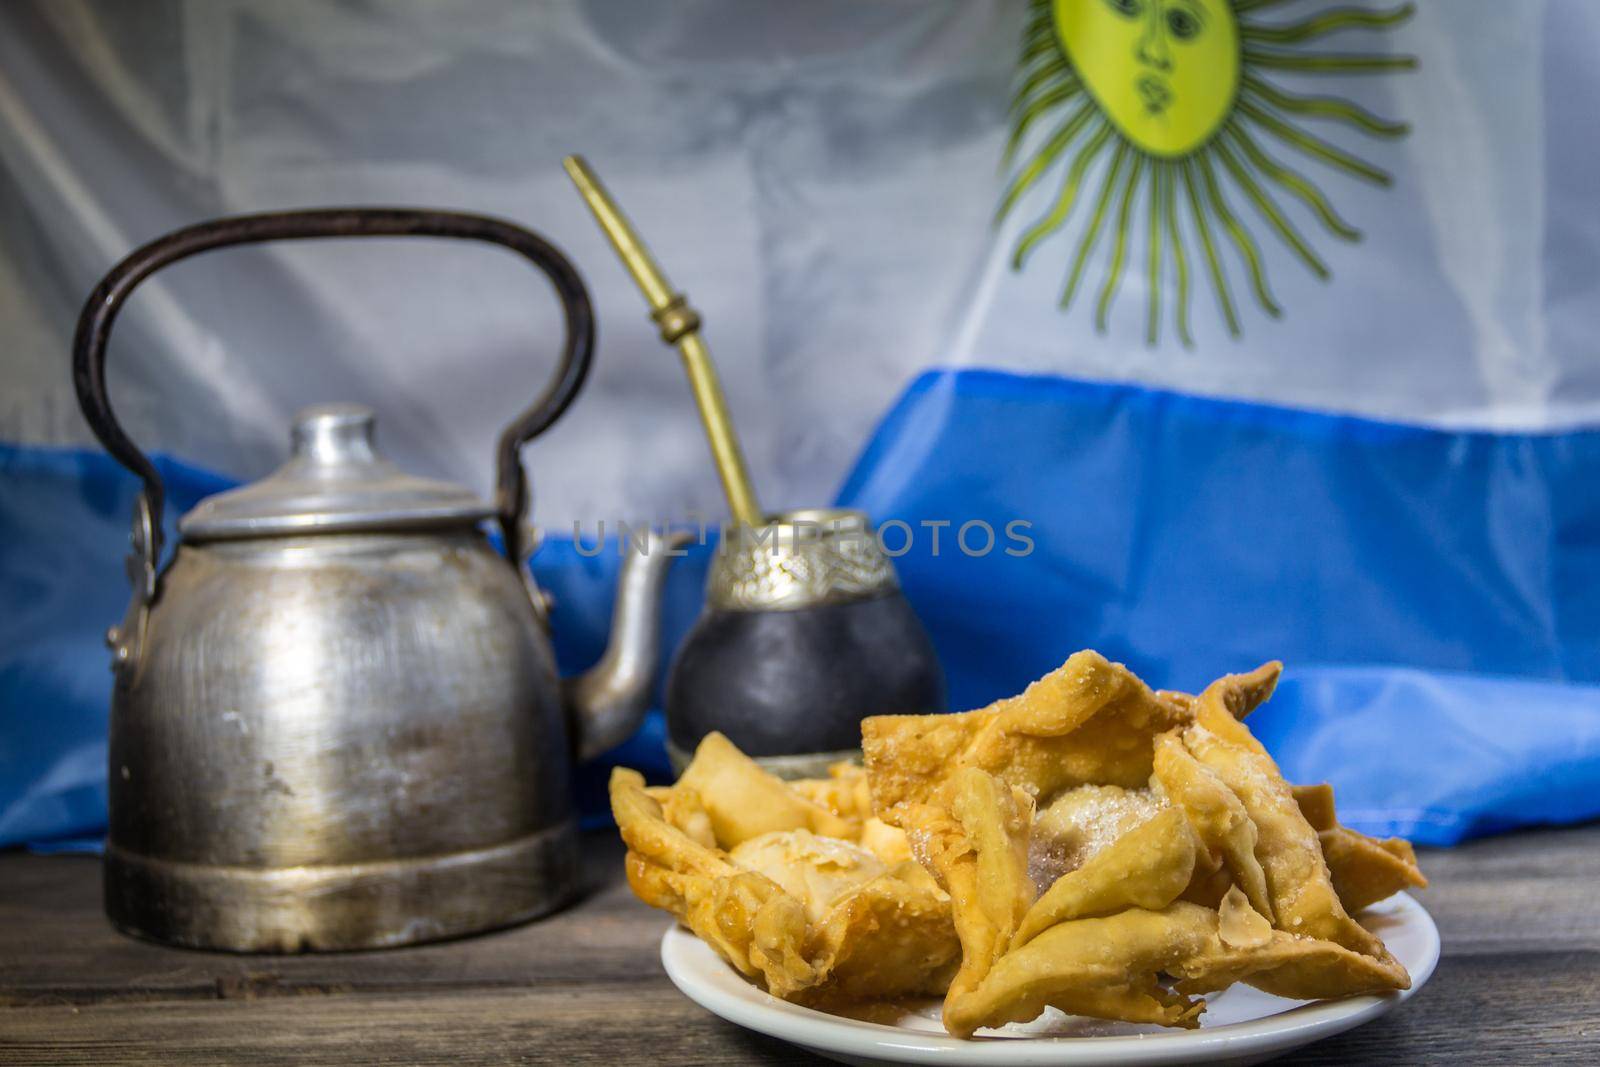 yerba mate, guitar and fried pastries, symbols of the Argentine tradition by GabrielaBertolini